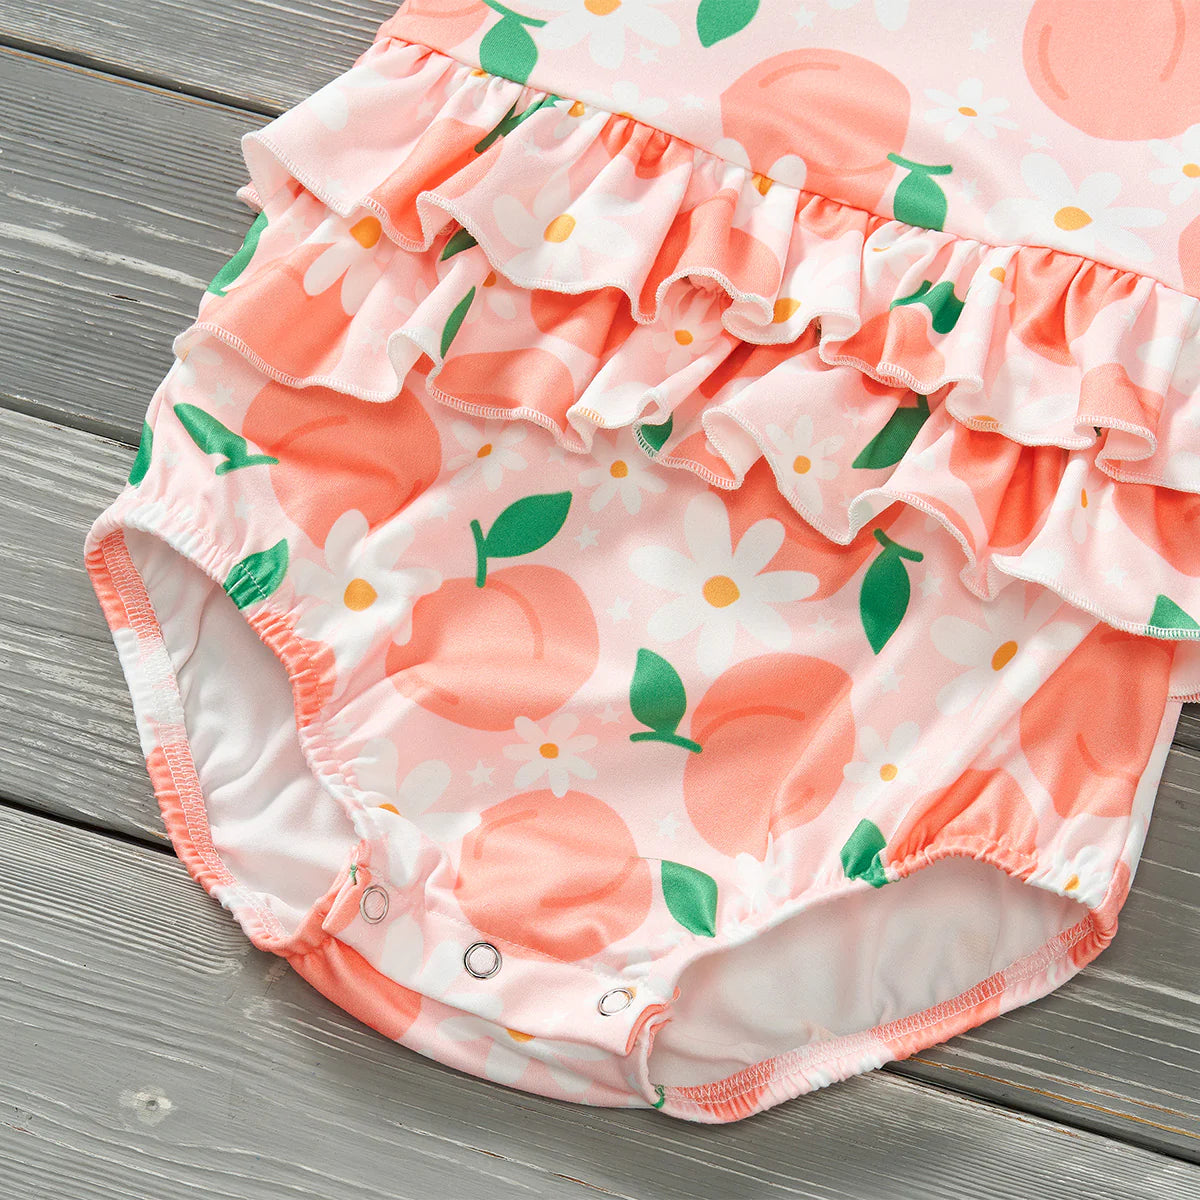 (Preorder) Peach Perfect Infant Romper by Pete + Lucy